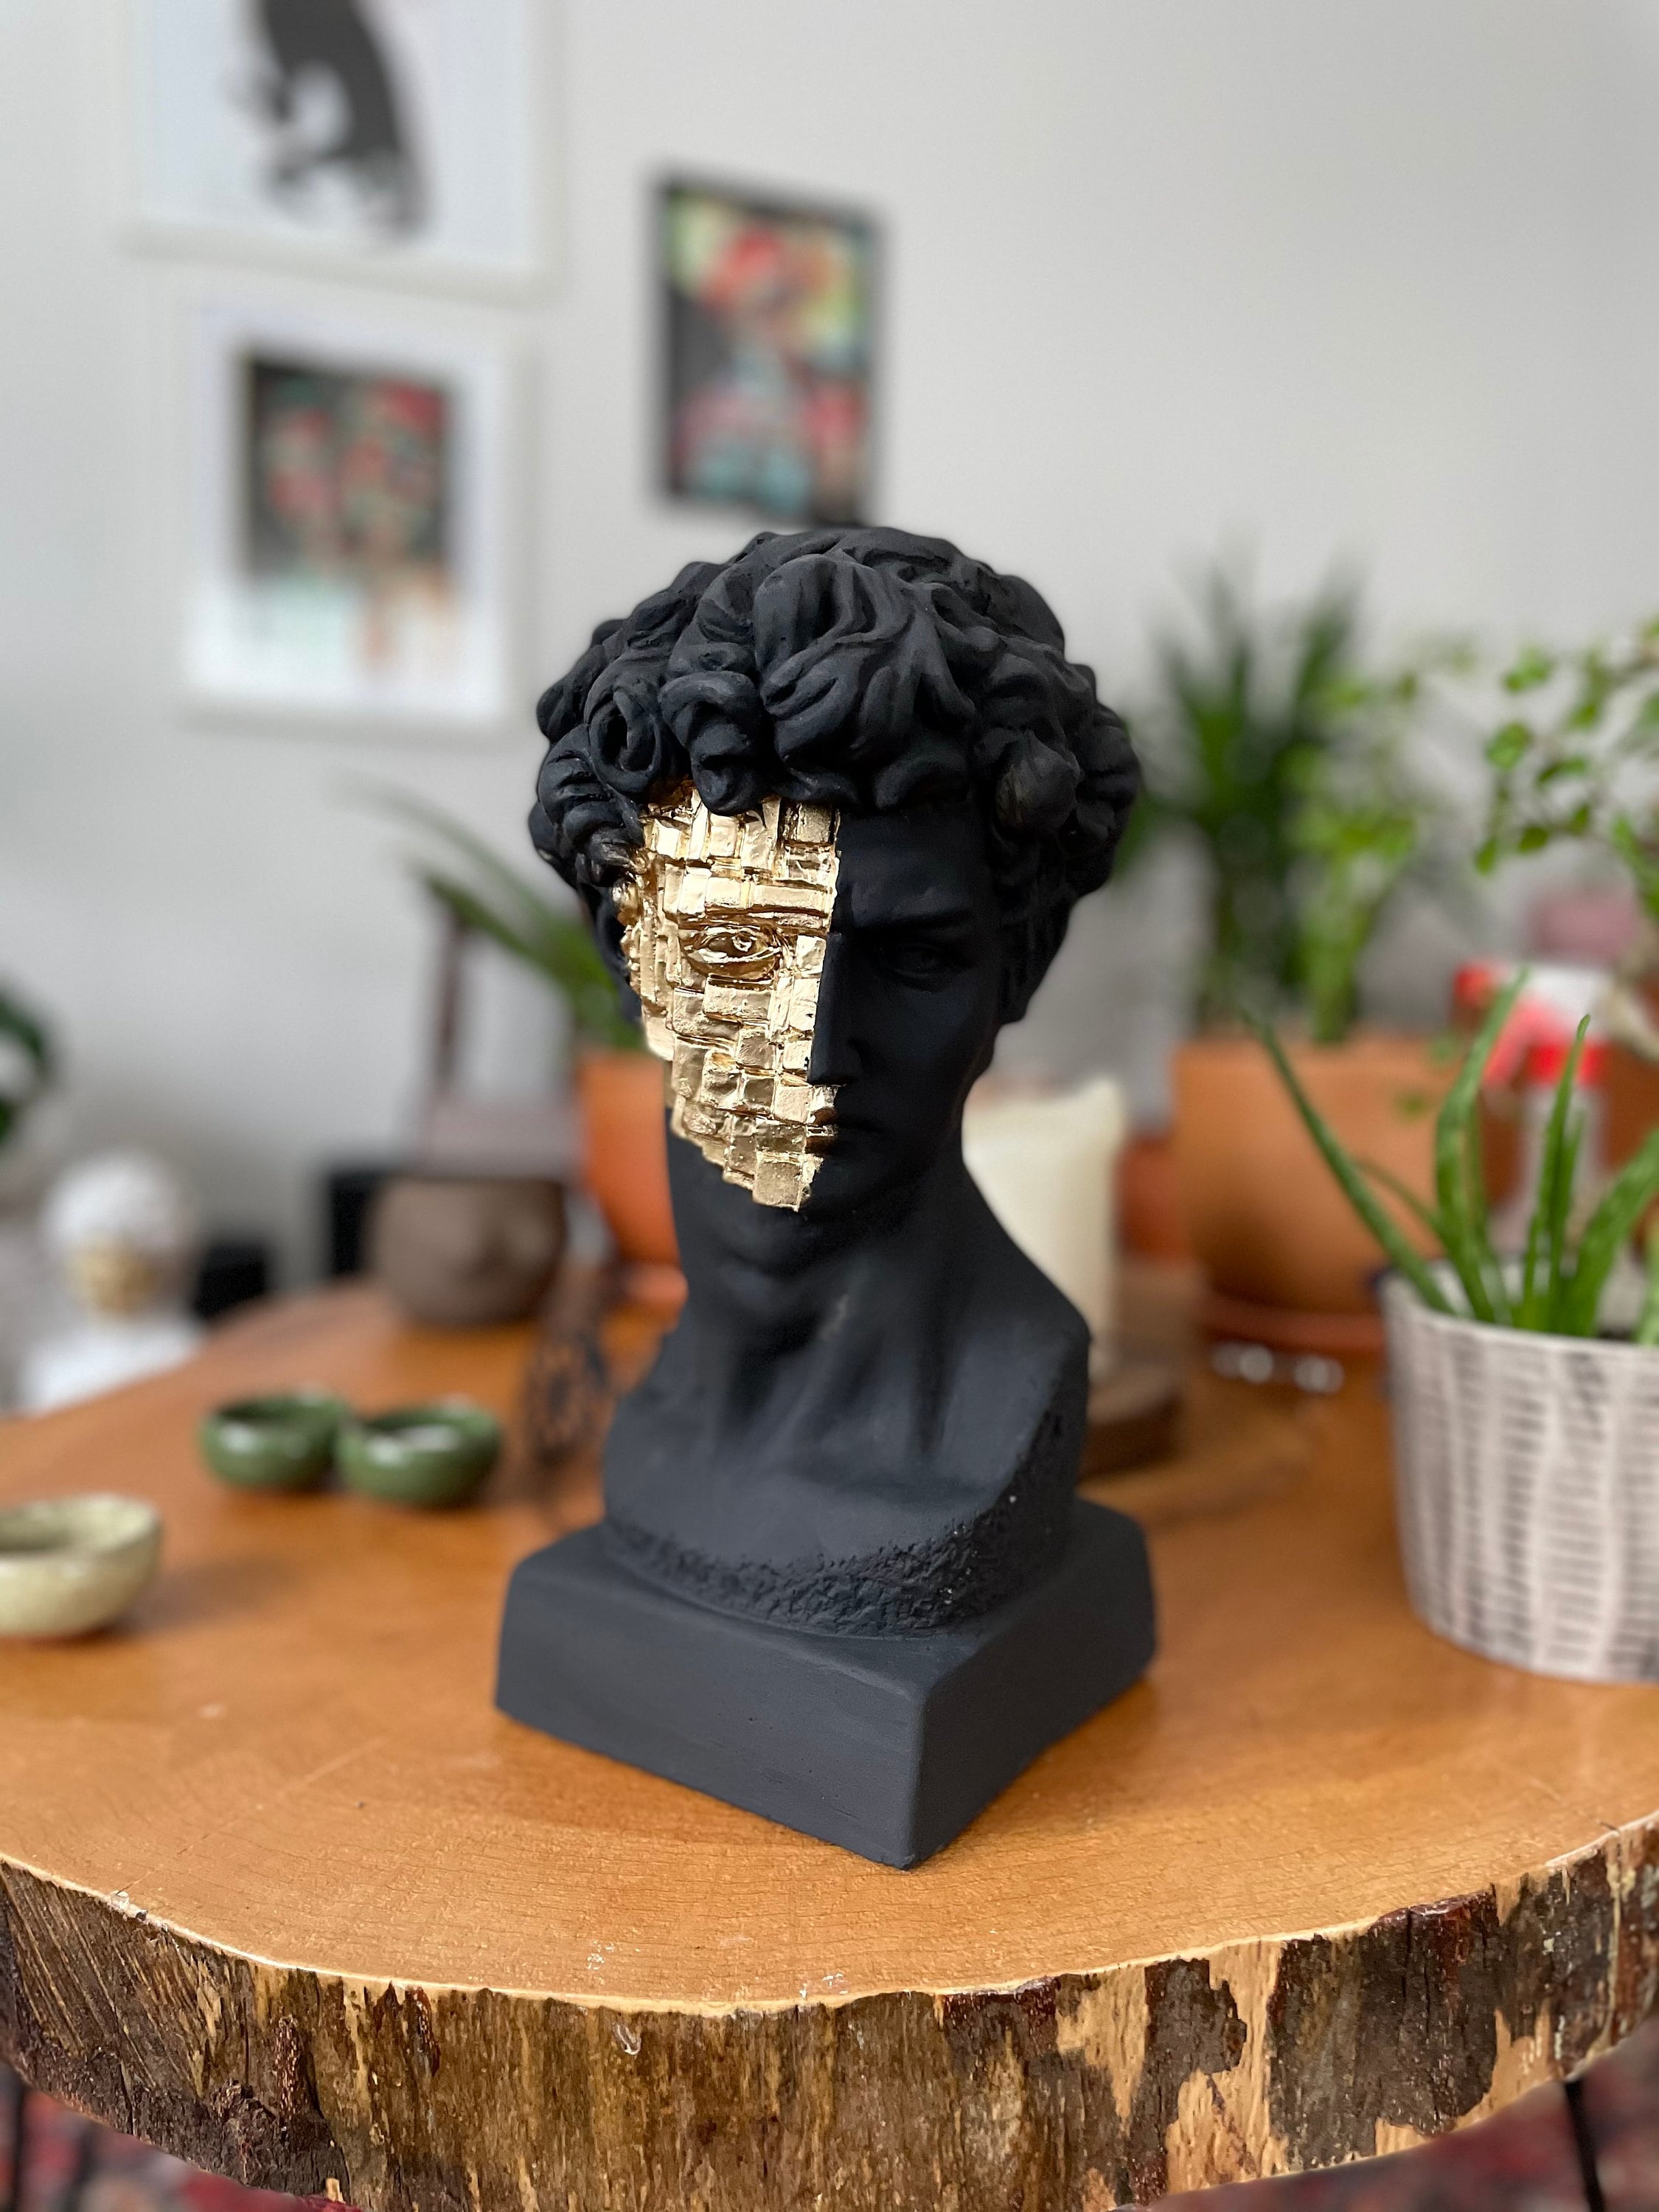 Timeless Opulence: Large David Bust Sculpture in Black and Gold